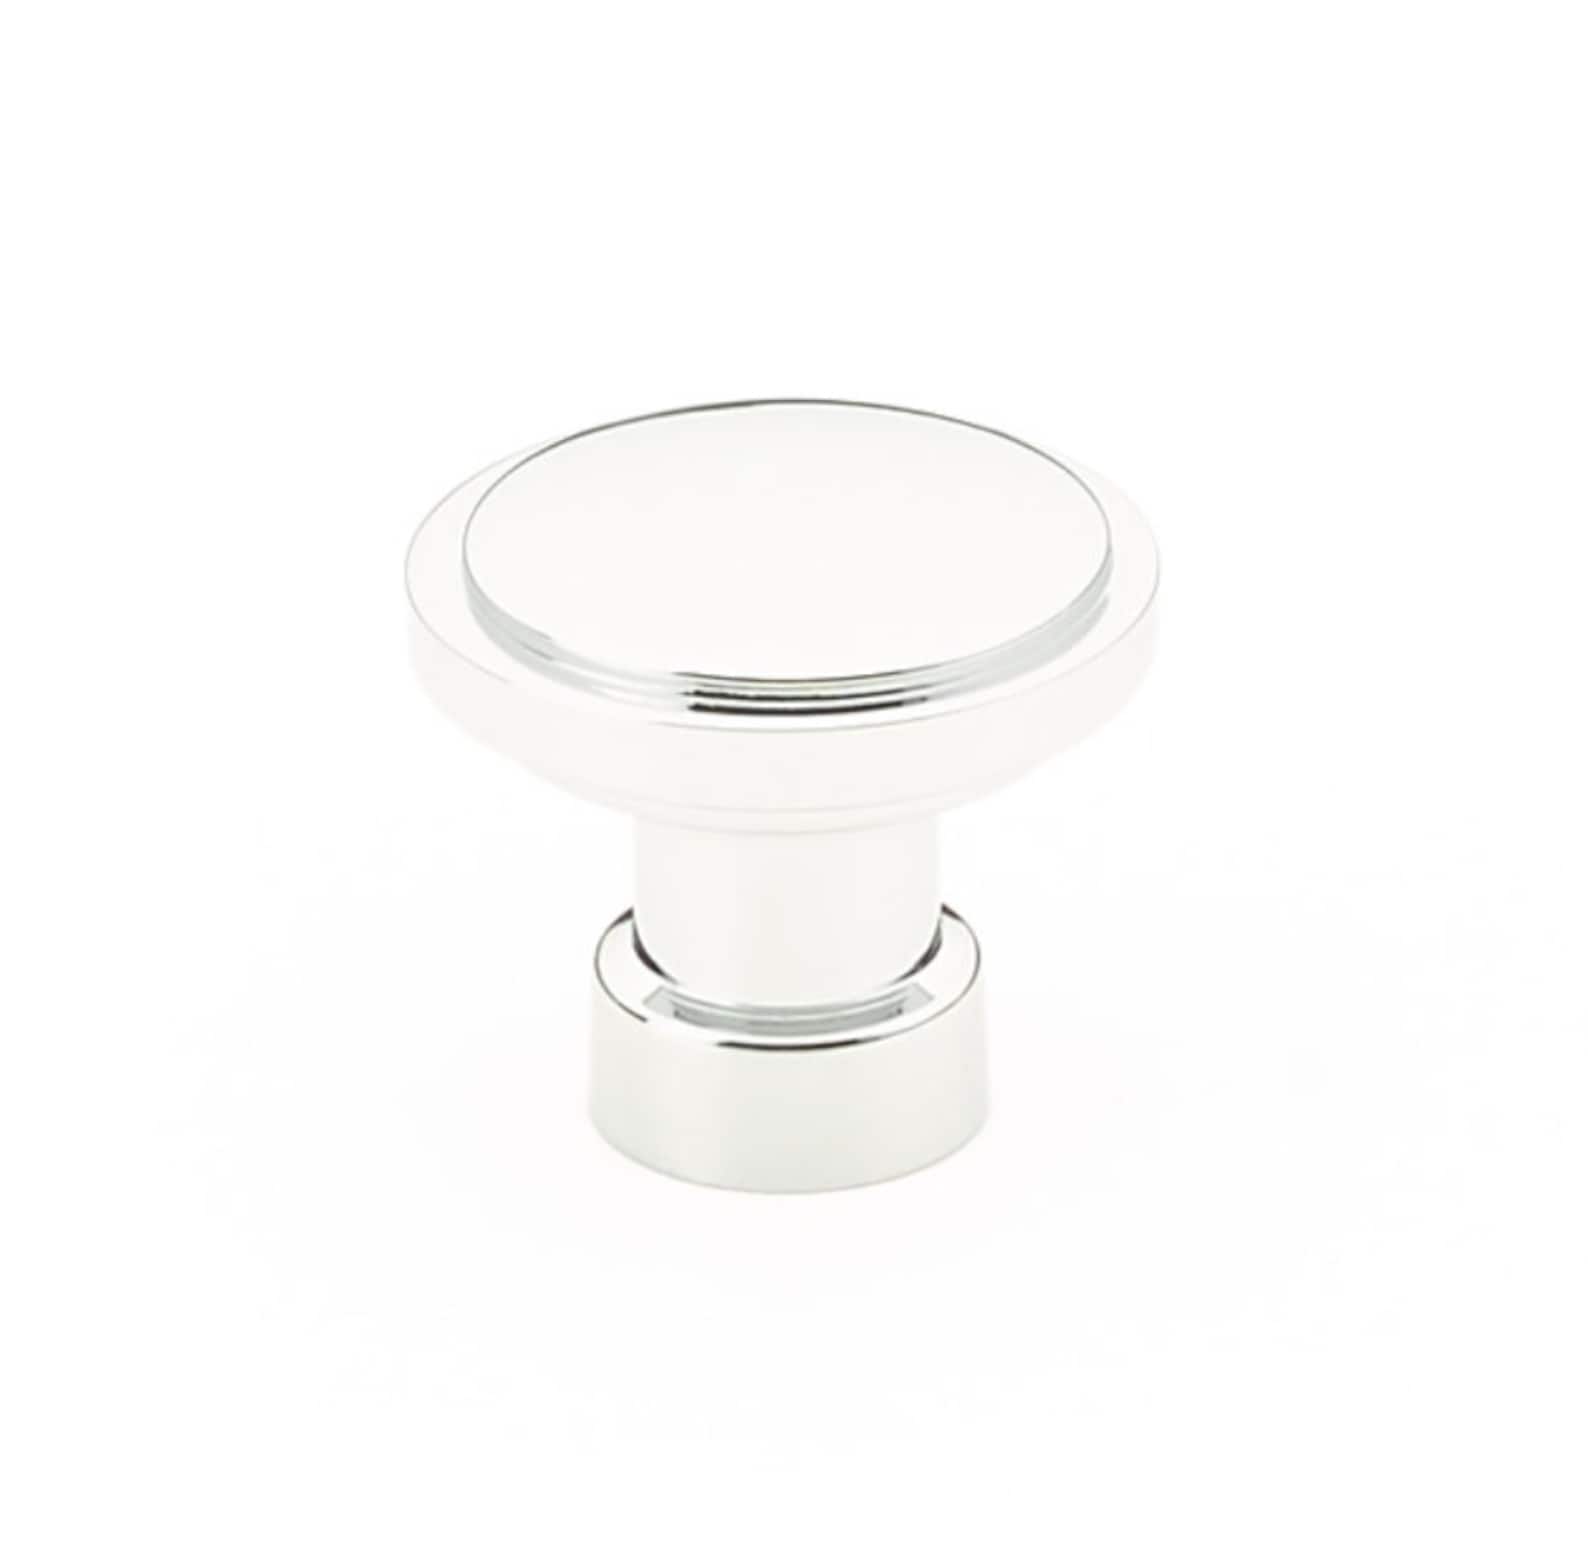 Polished Chrome "Industry" Cabinet Knobs and Drawer Pulls - Industry Hardware